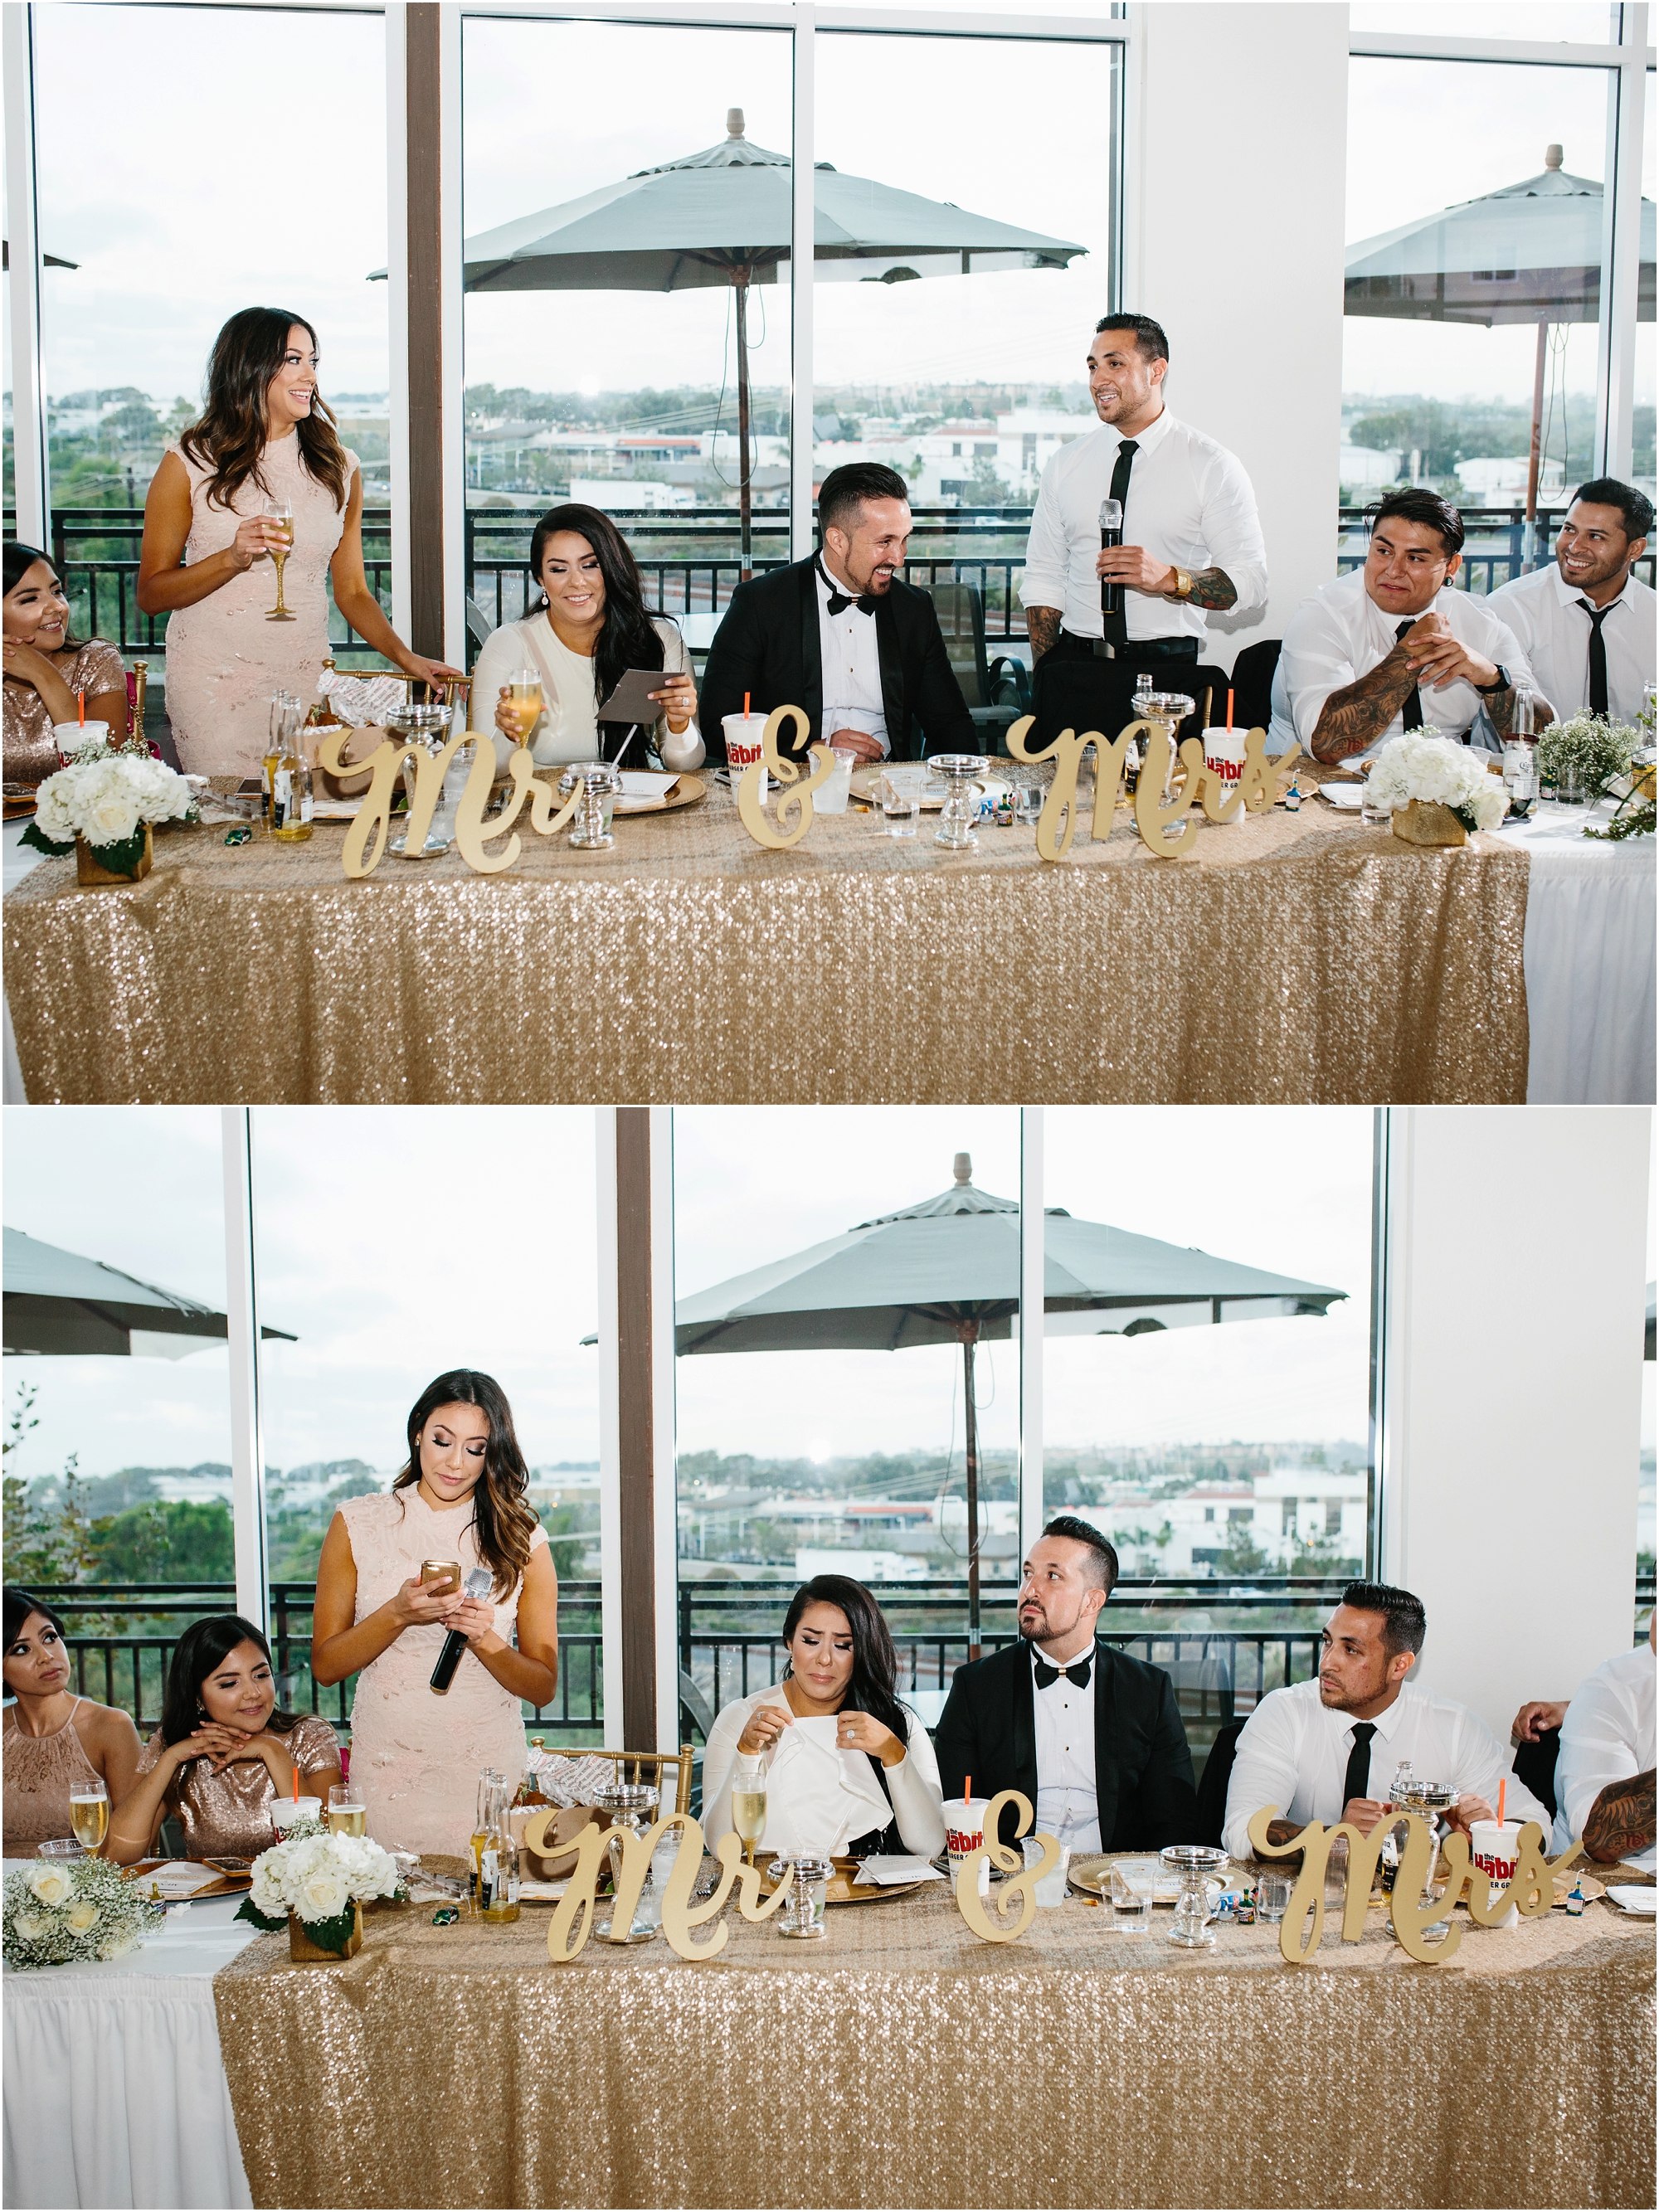 Toasts - https://brittneyhannonphotography.com